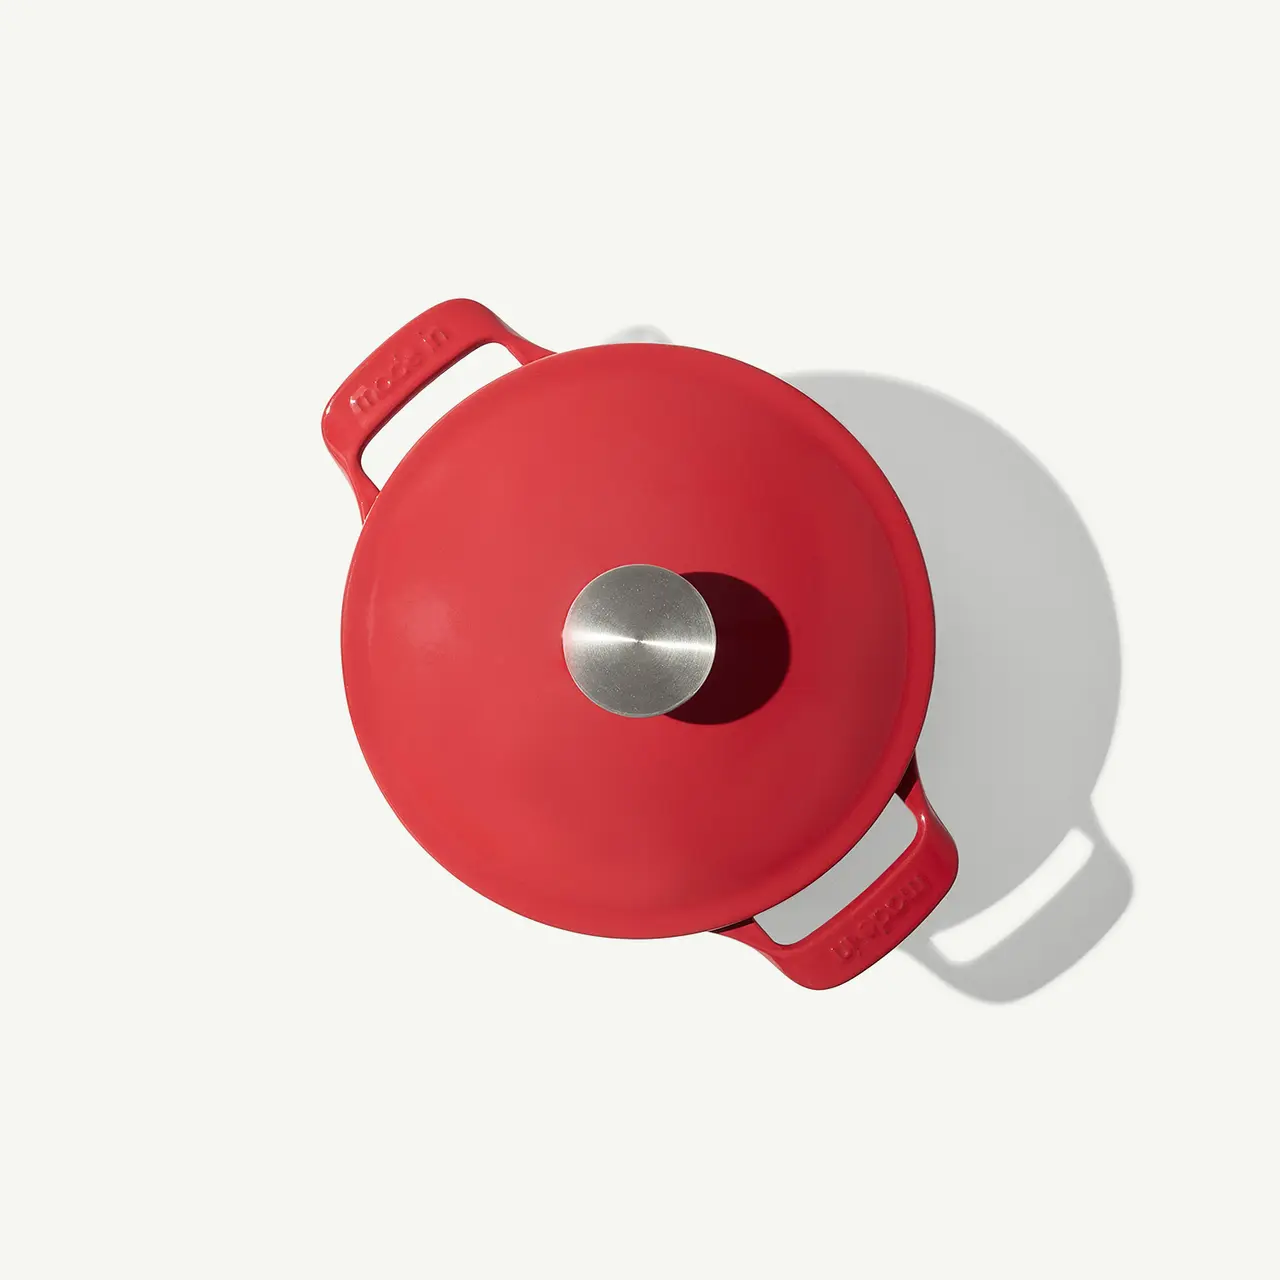 A red kettle with a silver spout and a lid handle is viewed from above against a white background.